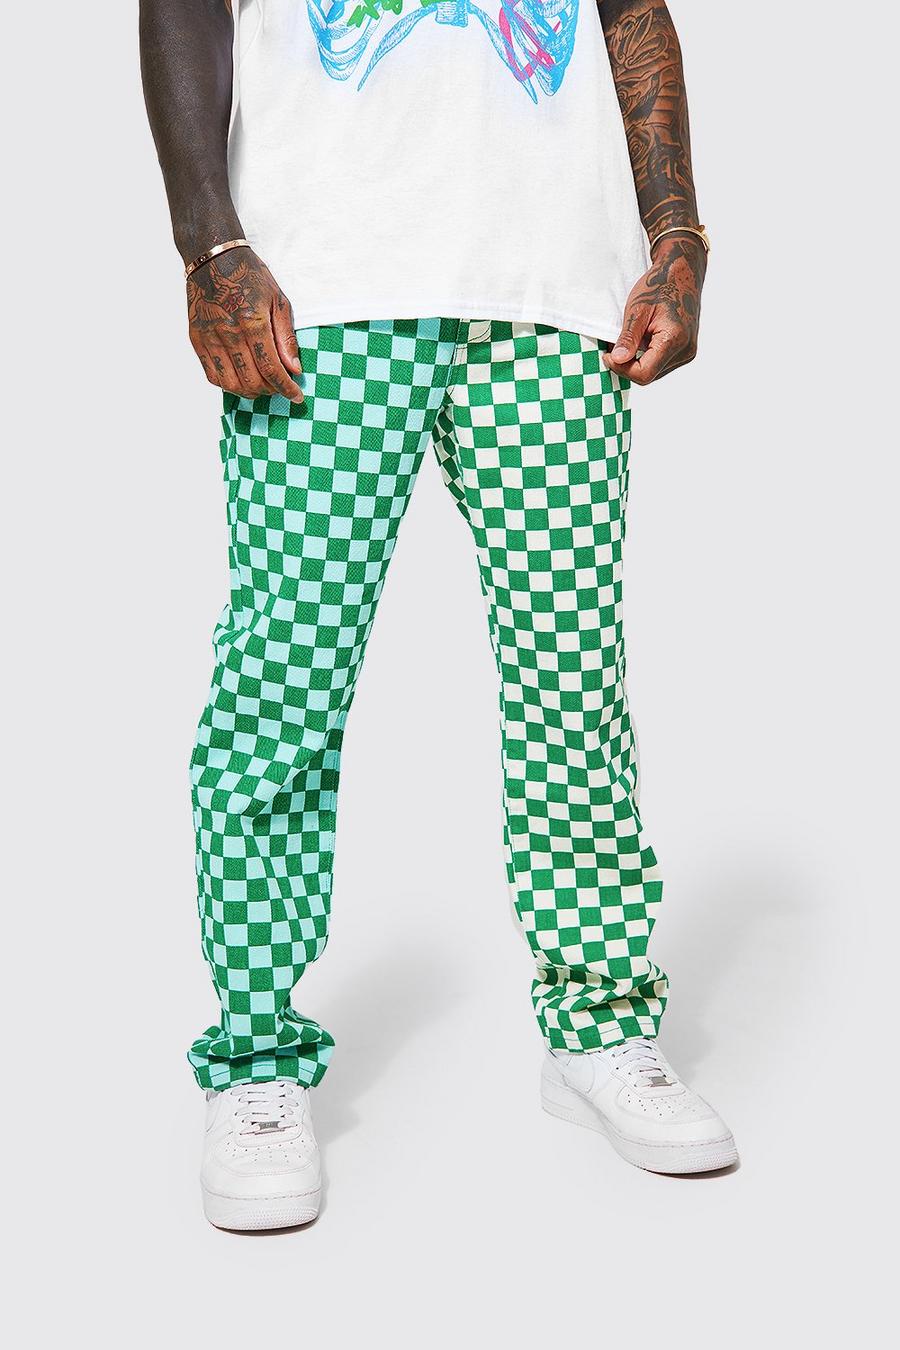 Jeans rilassati a scacchi a effetto patchwork simmetrico, Green image number 1